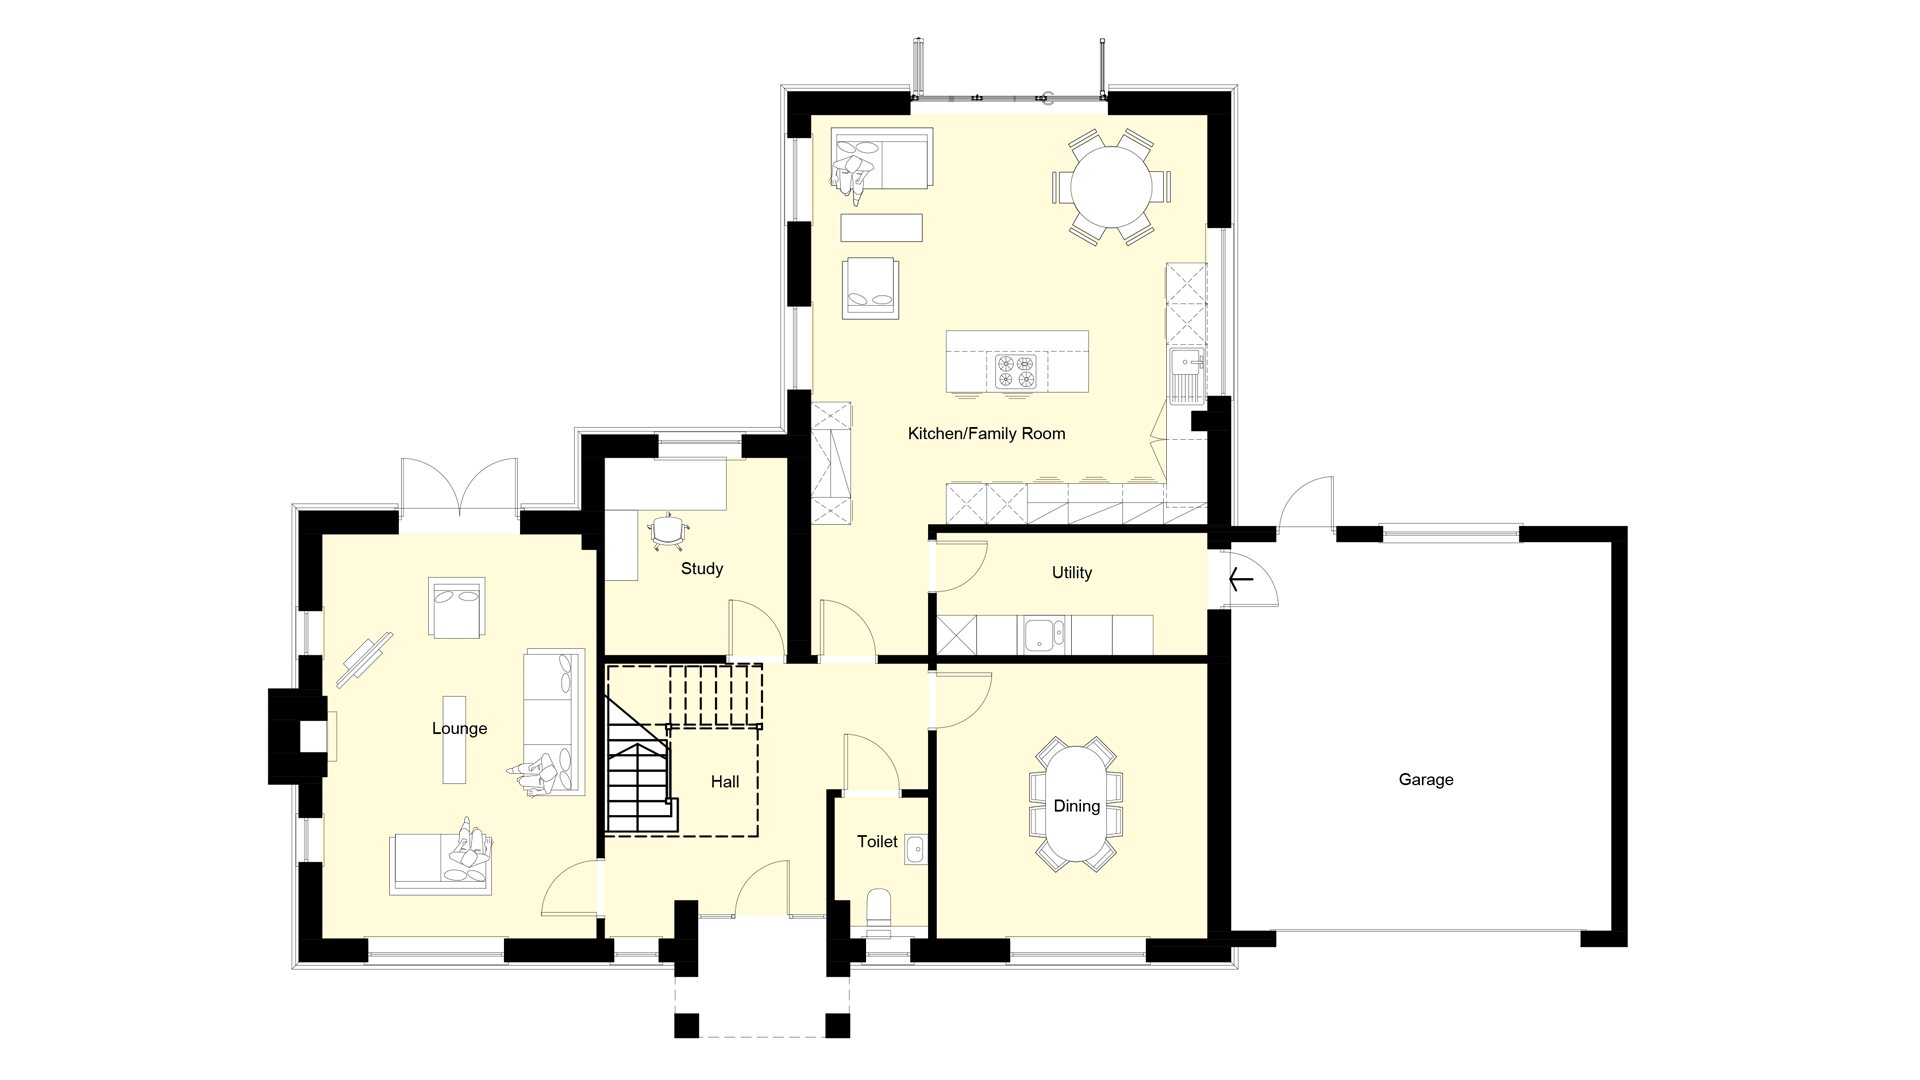 Layout of the ground floor at Plot 12 Weavers park.